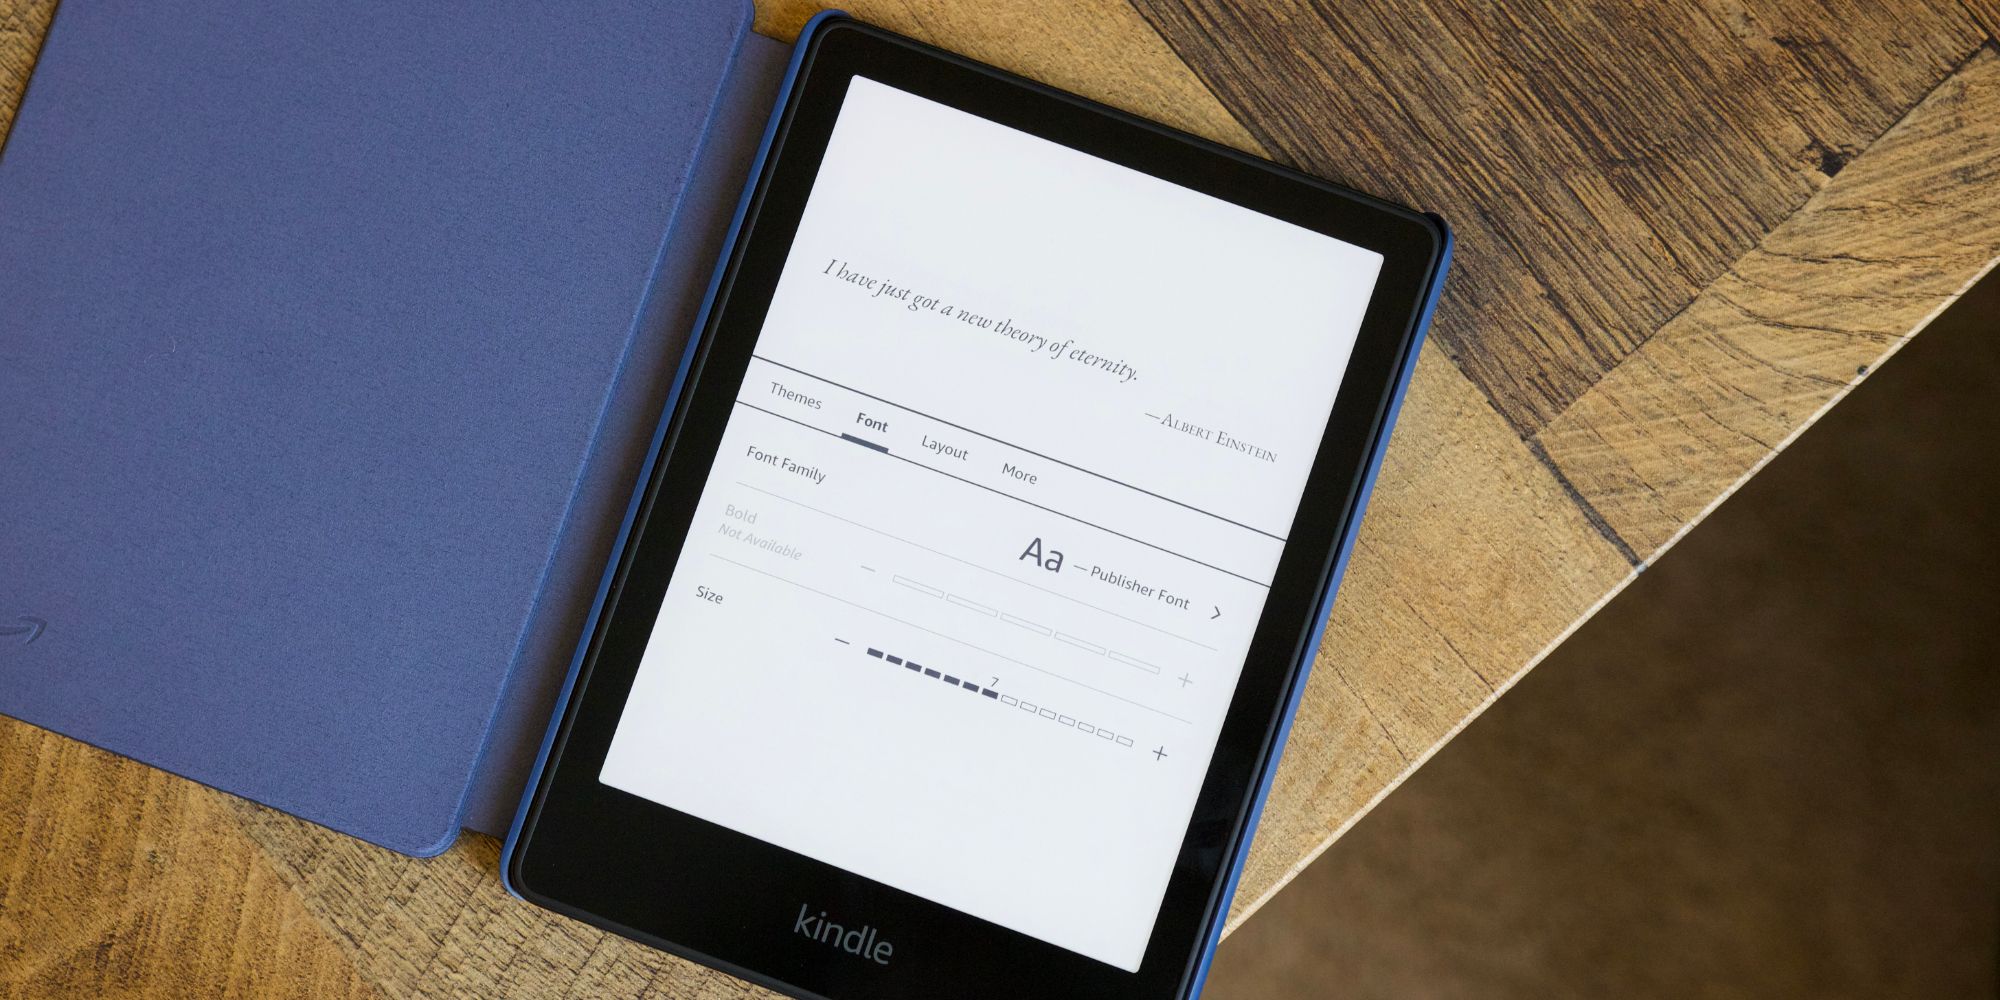 How to Get to the Home Screen on a Kindle